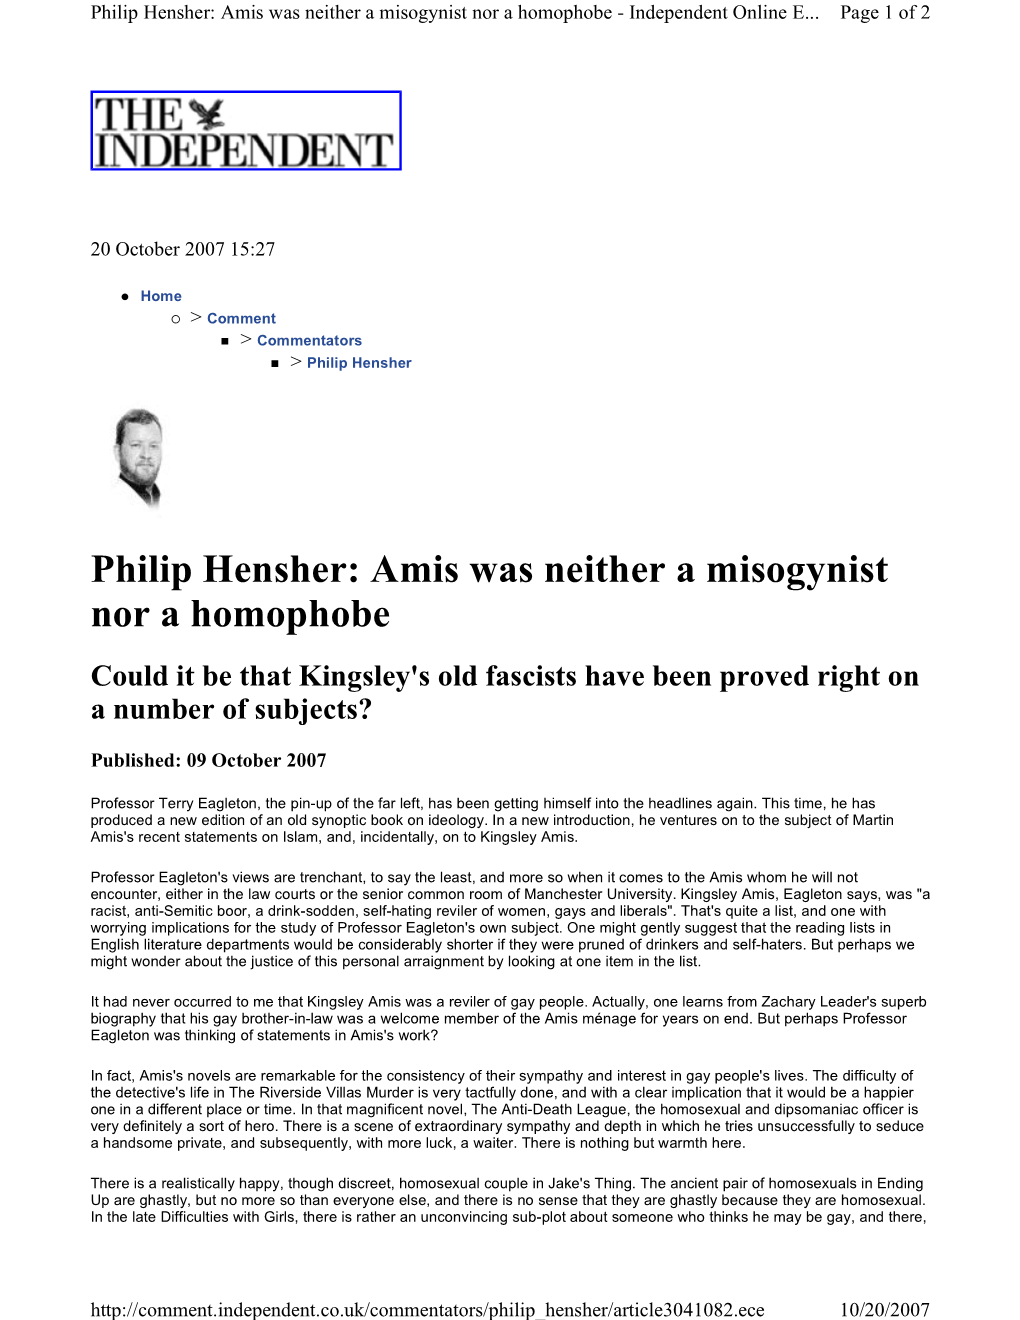 Philip Hensher: Amis Was Neither a Misogynist Nor a Homophobe ­ Independent Online E